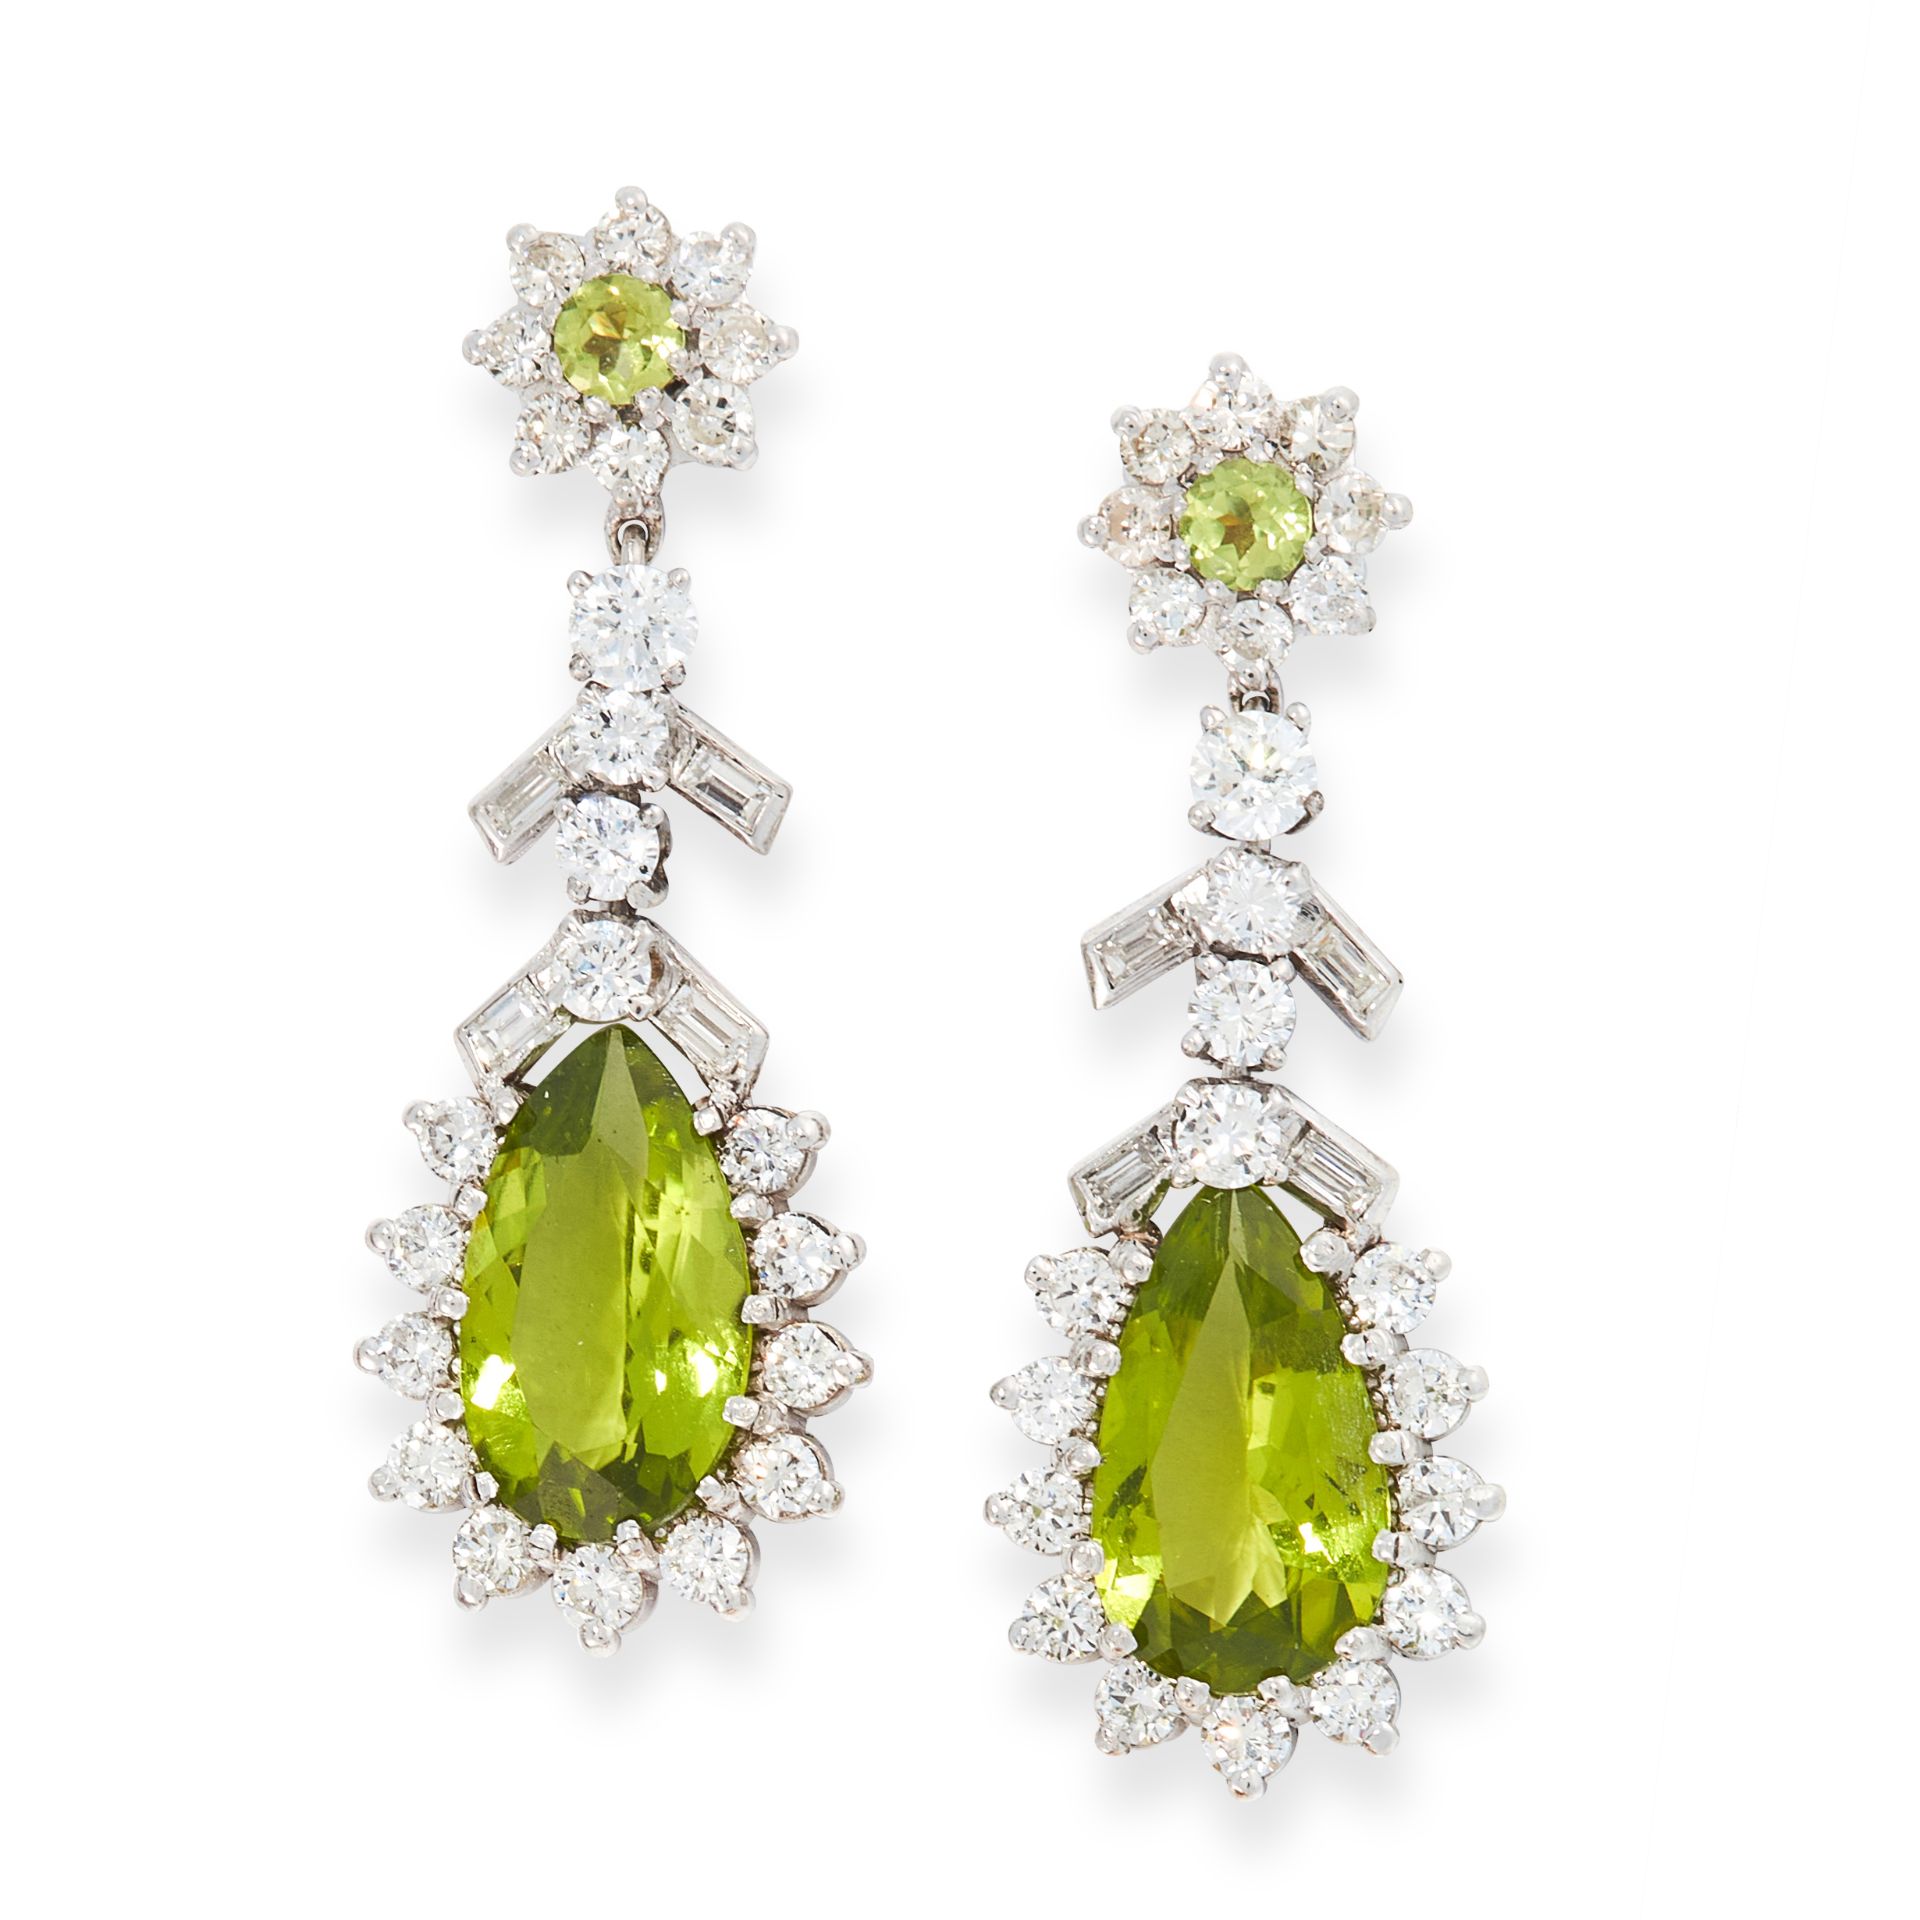 A PAIR OF PERIDOT AND DIAMOND EARRINGS in 18ct white gold, each set with a pear cut peridot